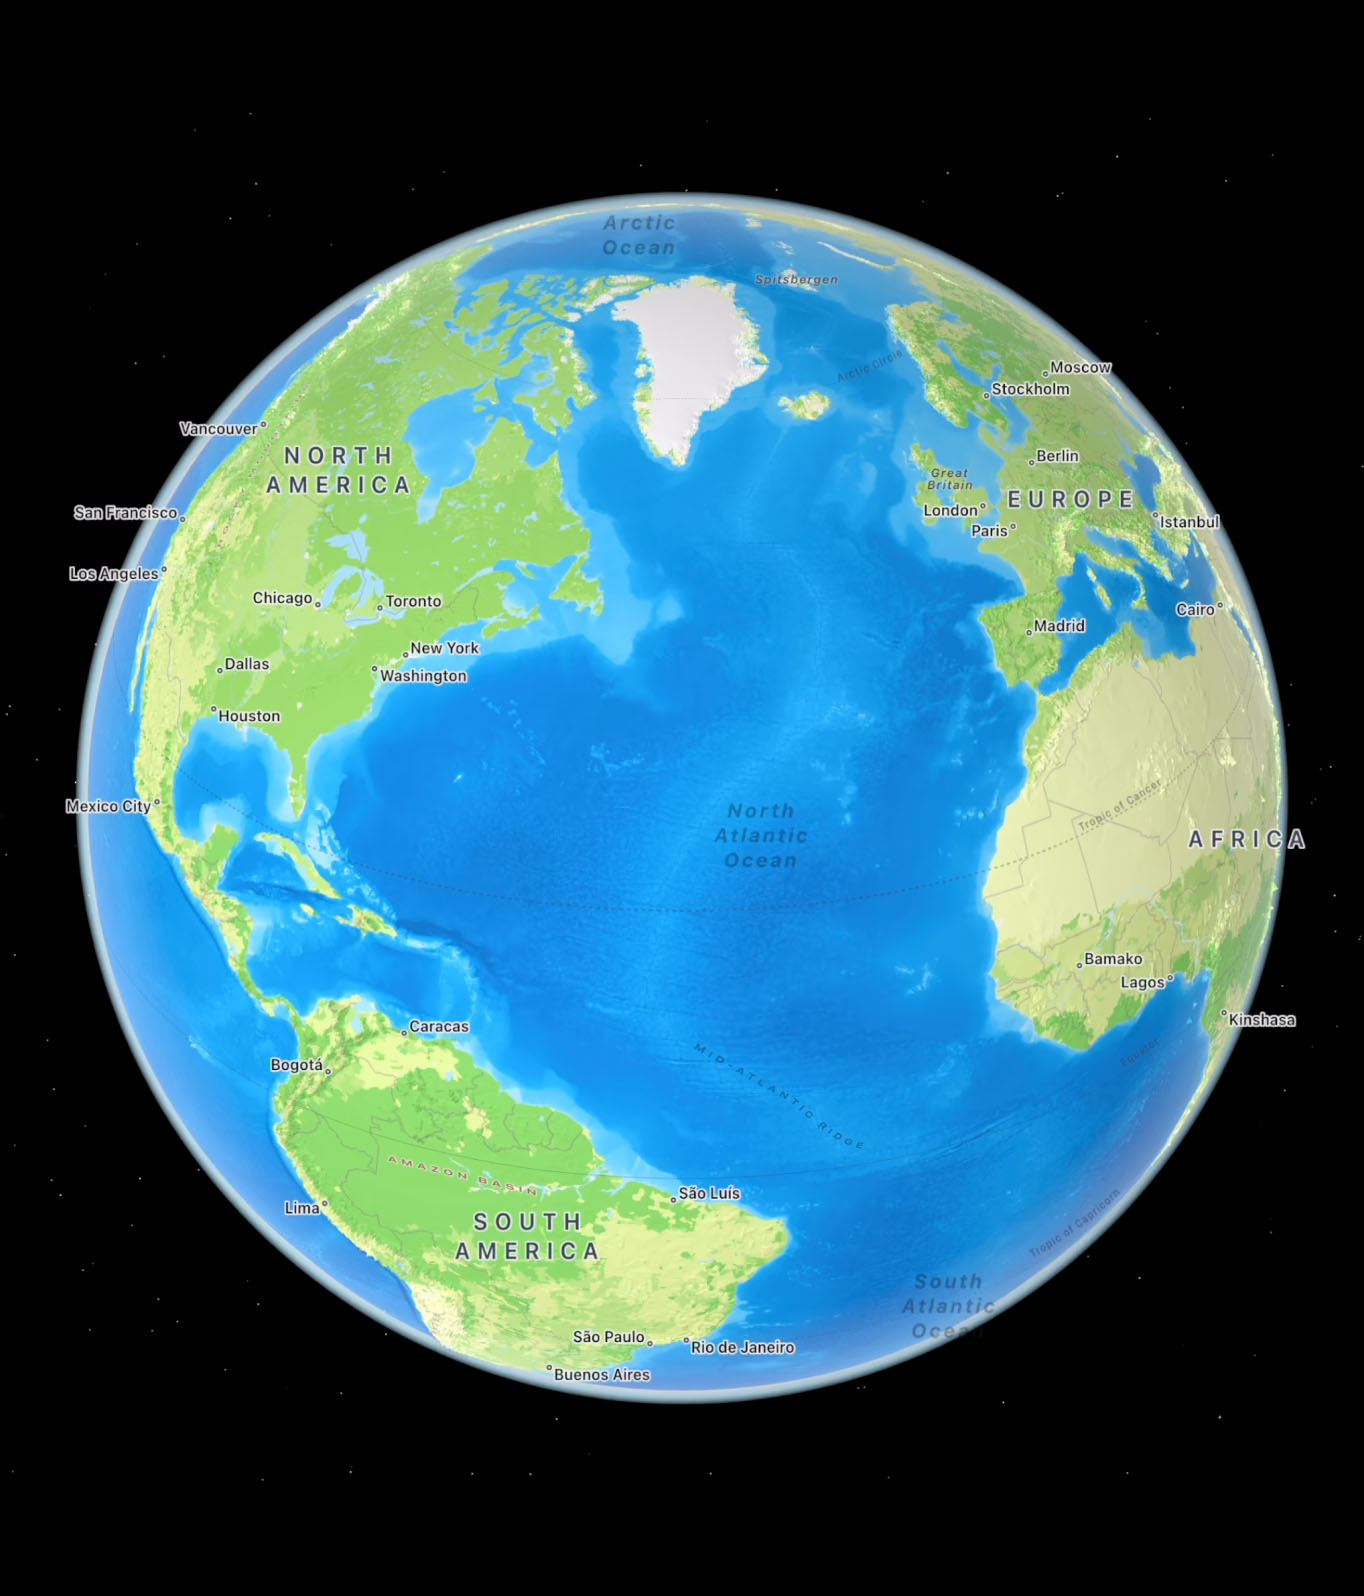 Apple's marketing image showing the globe view on Apple Maps